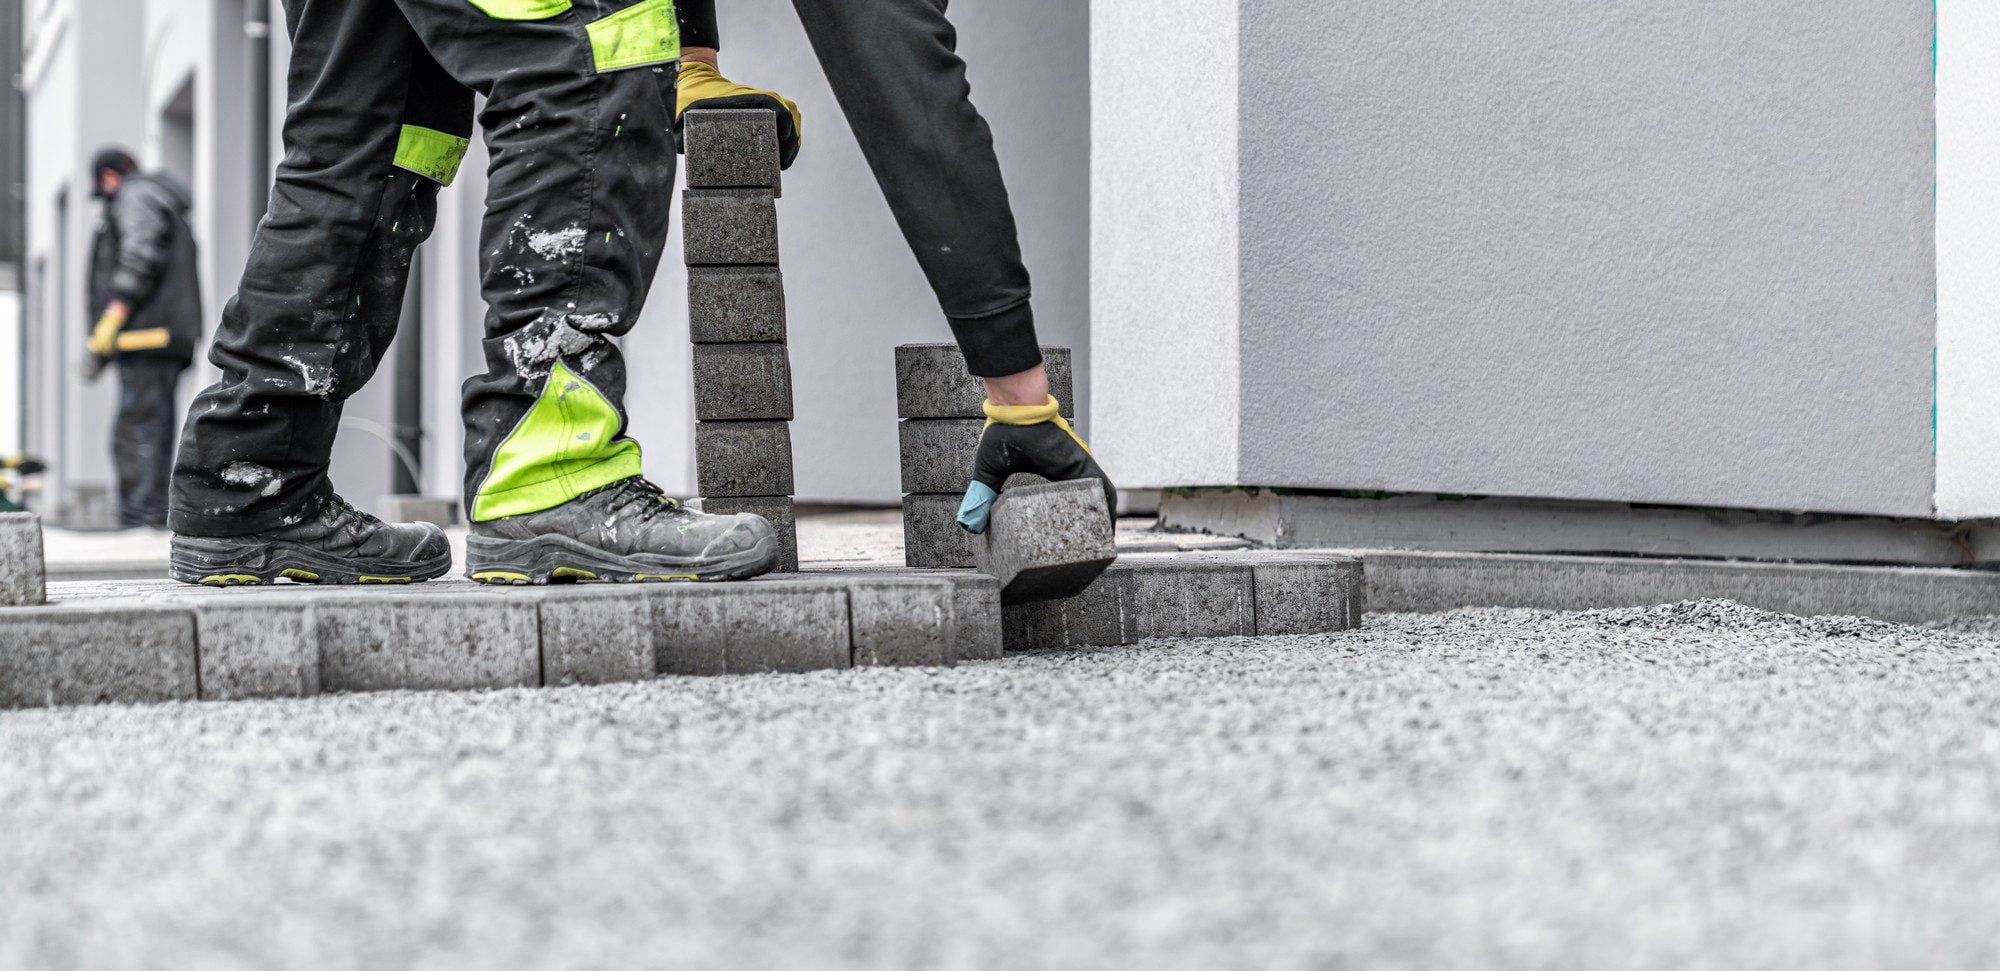 The image shows a close-up view of a construction or landscaping site where paving work is being carried out. There are two workers in the image. The one in the foreground is wearing dirty work trousers with reflective hi-visibility strips around the lower leg, and sturdy work boots, indicating that they are involved in manual labour. This person is stepping onto a raised platform or curb. The second worker in the background is bent over and appears to be handling materials or tools required for the job.Both workers are wearing gloves to protect their hands. The environment suggests an urban setting, perhaps a sidewalk or pedestrian area that is being paved or repaired. The paving blocks or stones being used are dark-coloured and stacked neatly in the foreground, with one being placed or adjusted by the worker. The ground is covered in a layer of gravel or small stones, which is typical for providing a stable base for paving. The building walls in the background indicate that this work is occurring near existing structures.